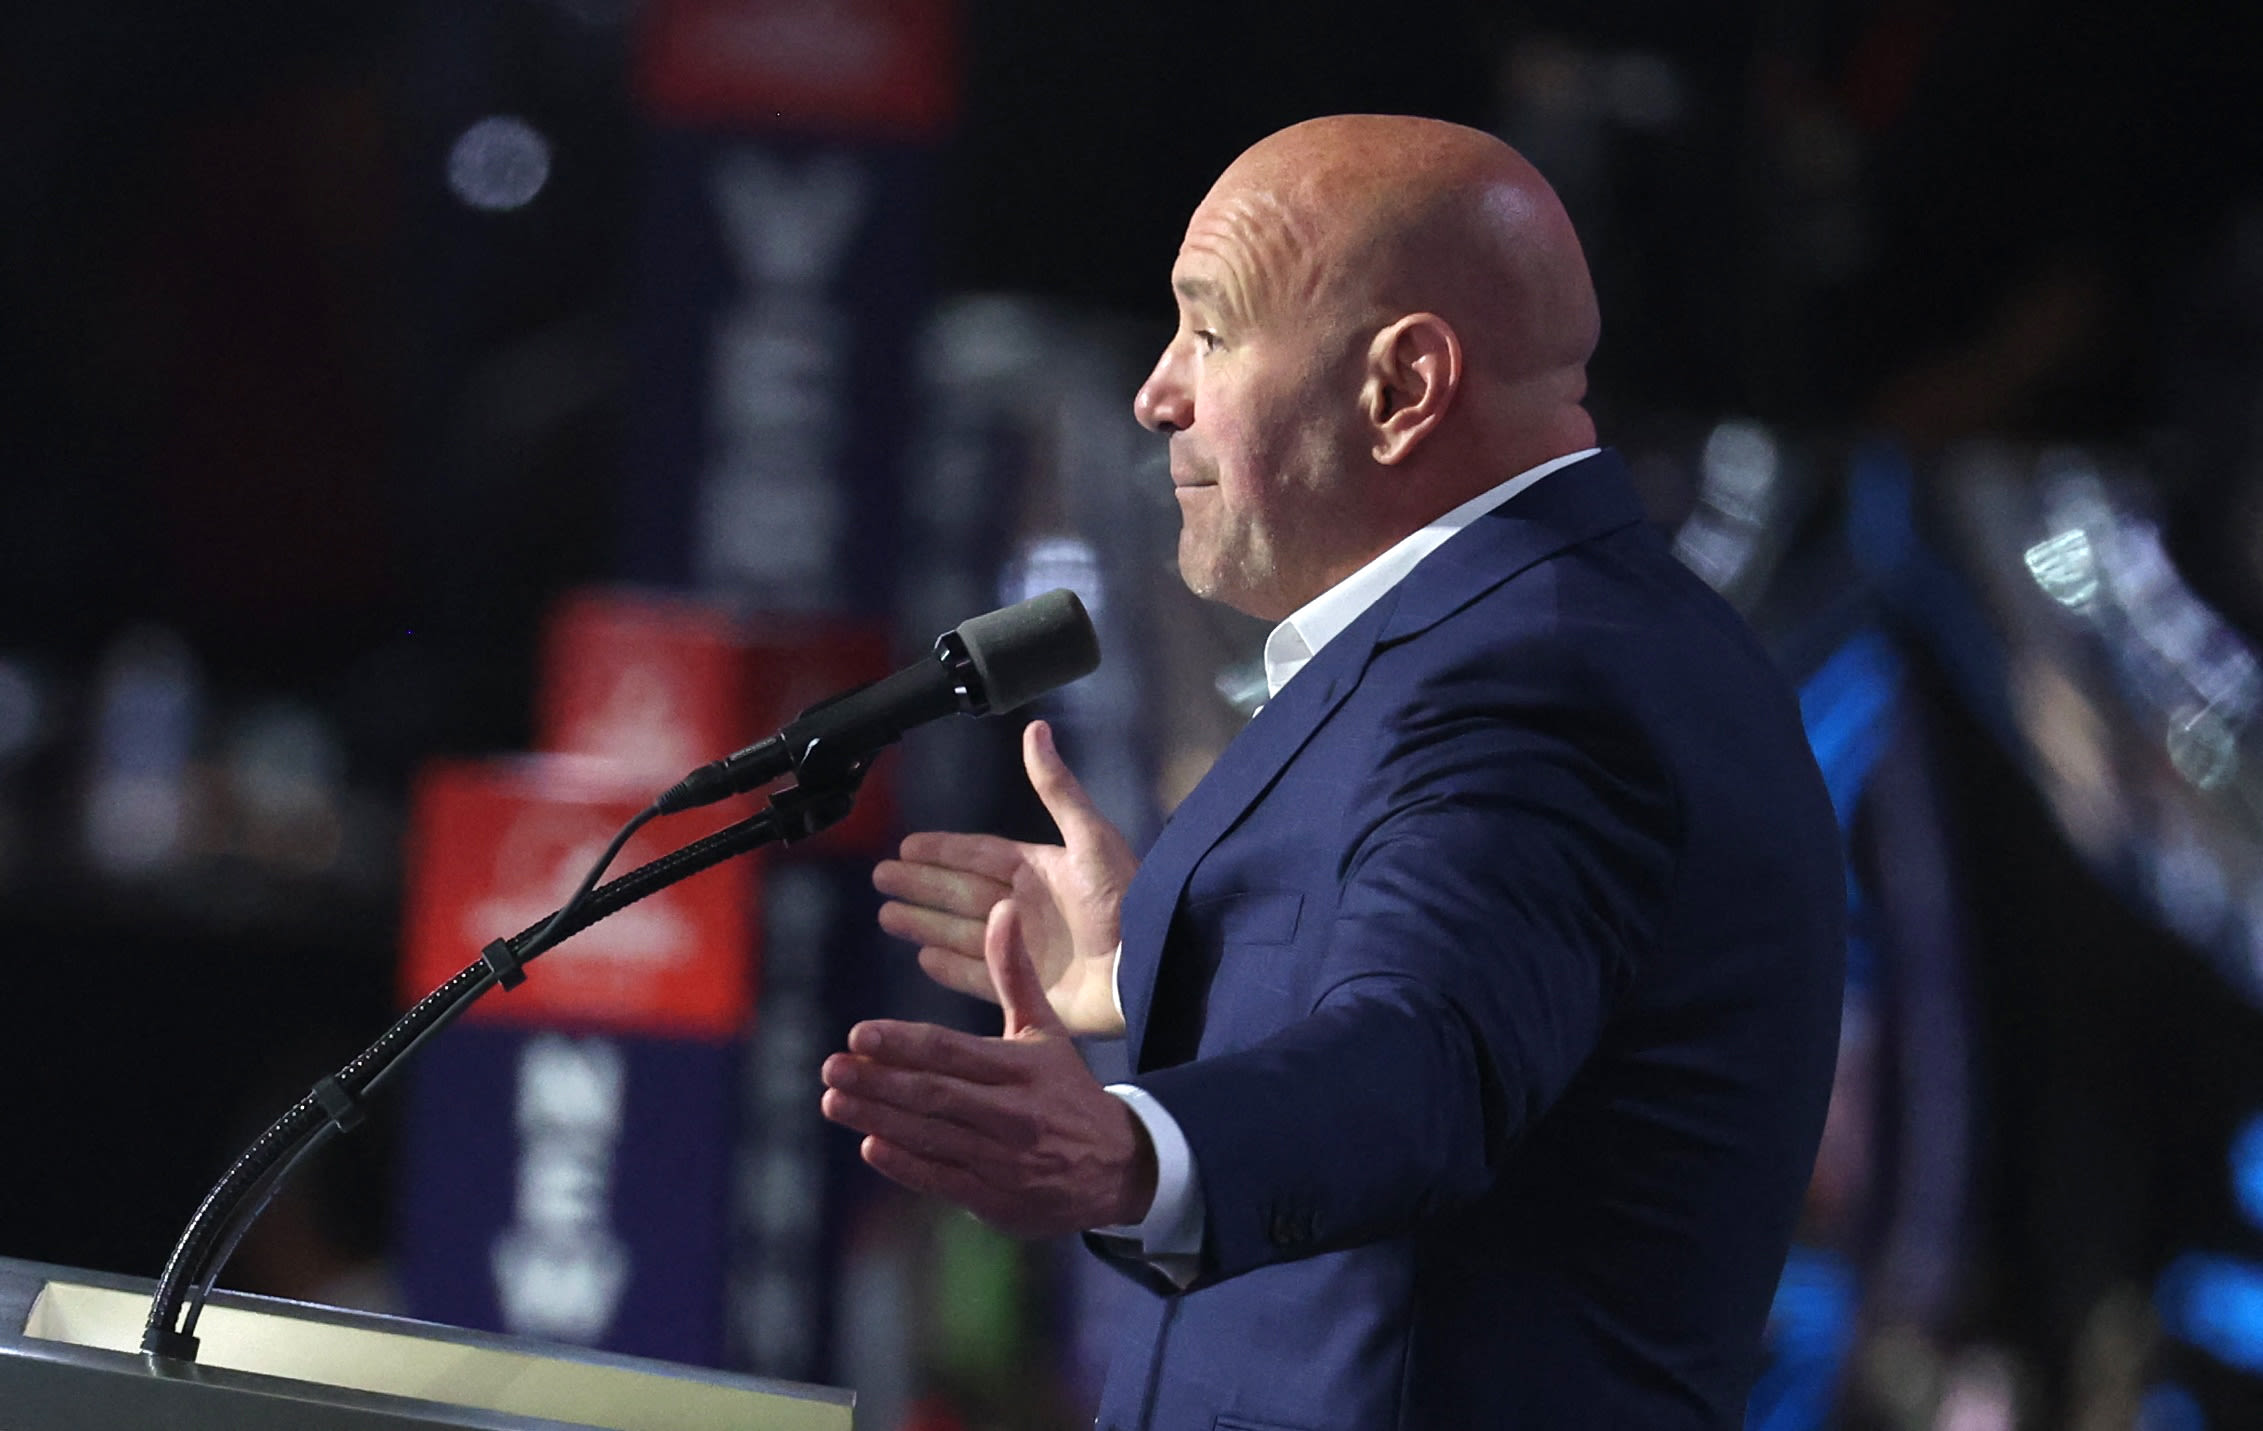 Dana White rallies for Donald Trump re-election at RNC: ‘I’m going to choose real American leadership’